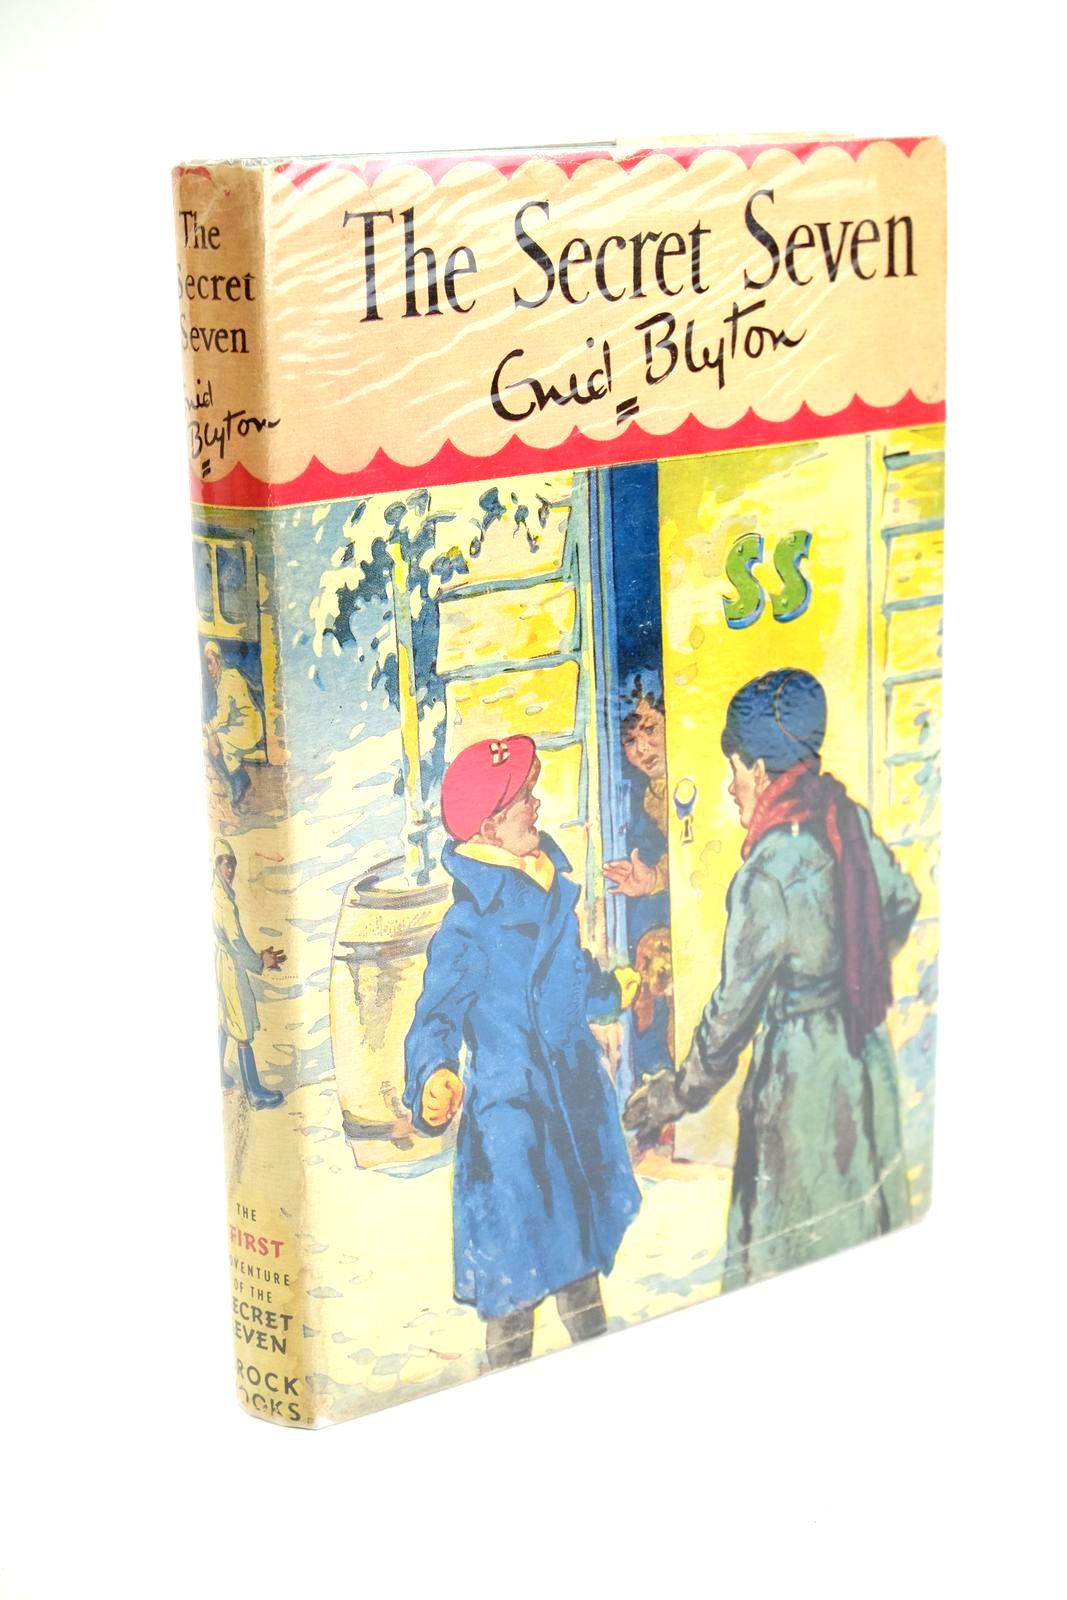 Photo of THE SECRET SEVEN written by Blyton, Enid illustrated by Brook, George published by Brockhampton Press (STOCK CODE: 1323547)  for sale by Stella & Rose's Books